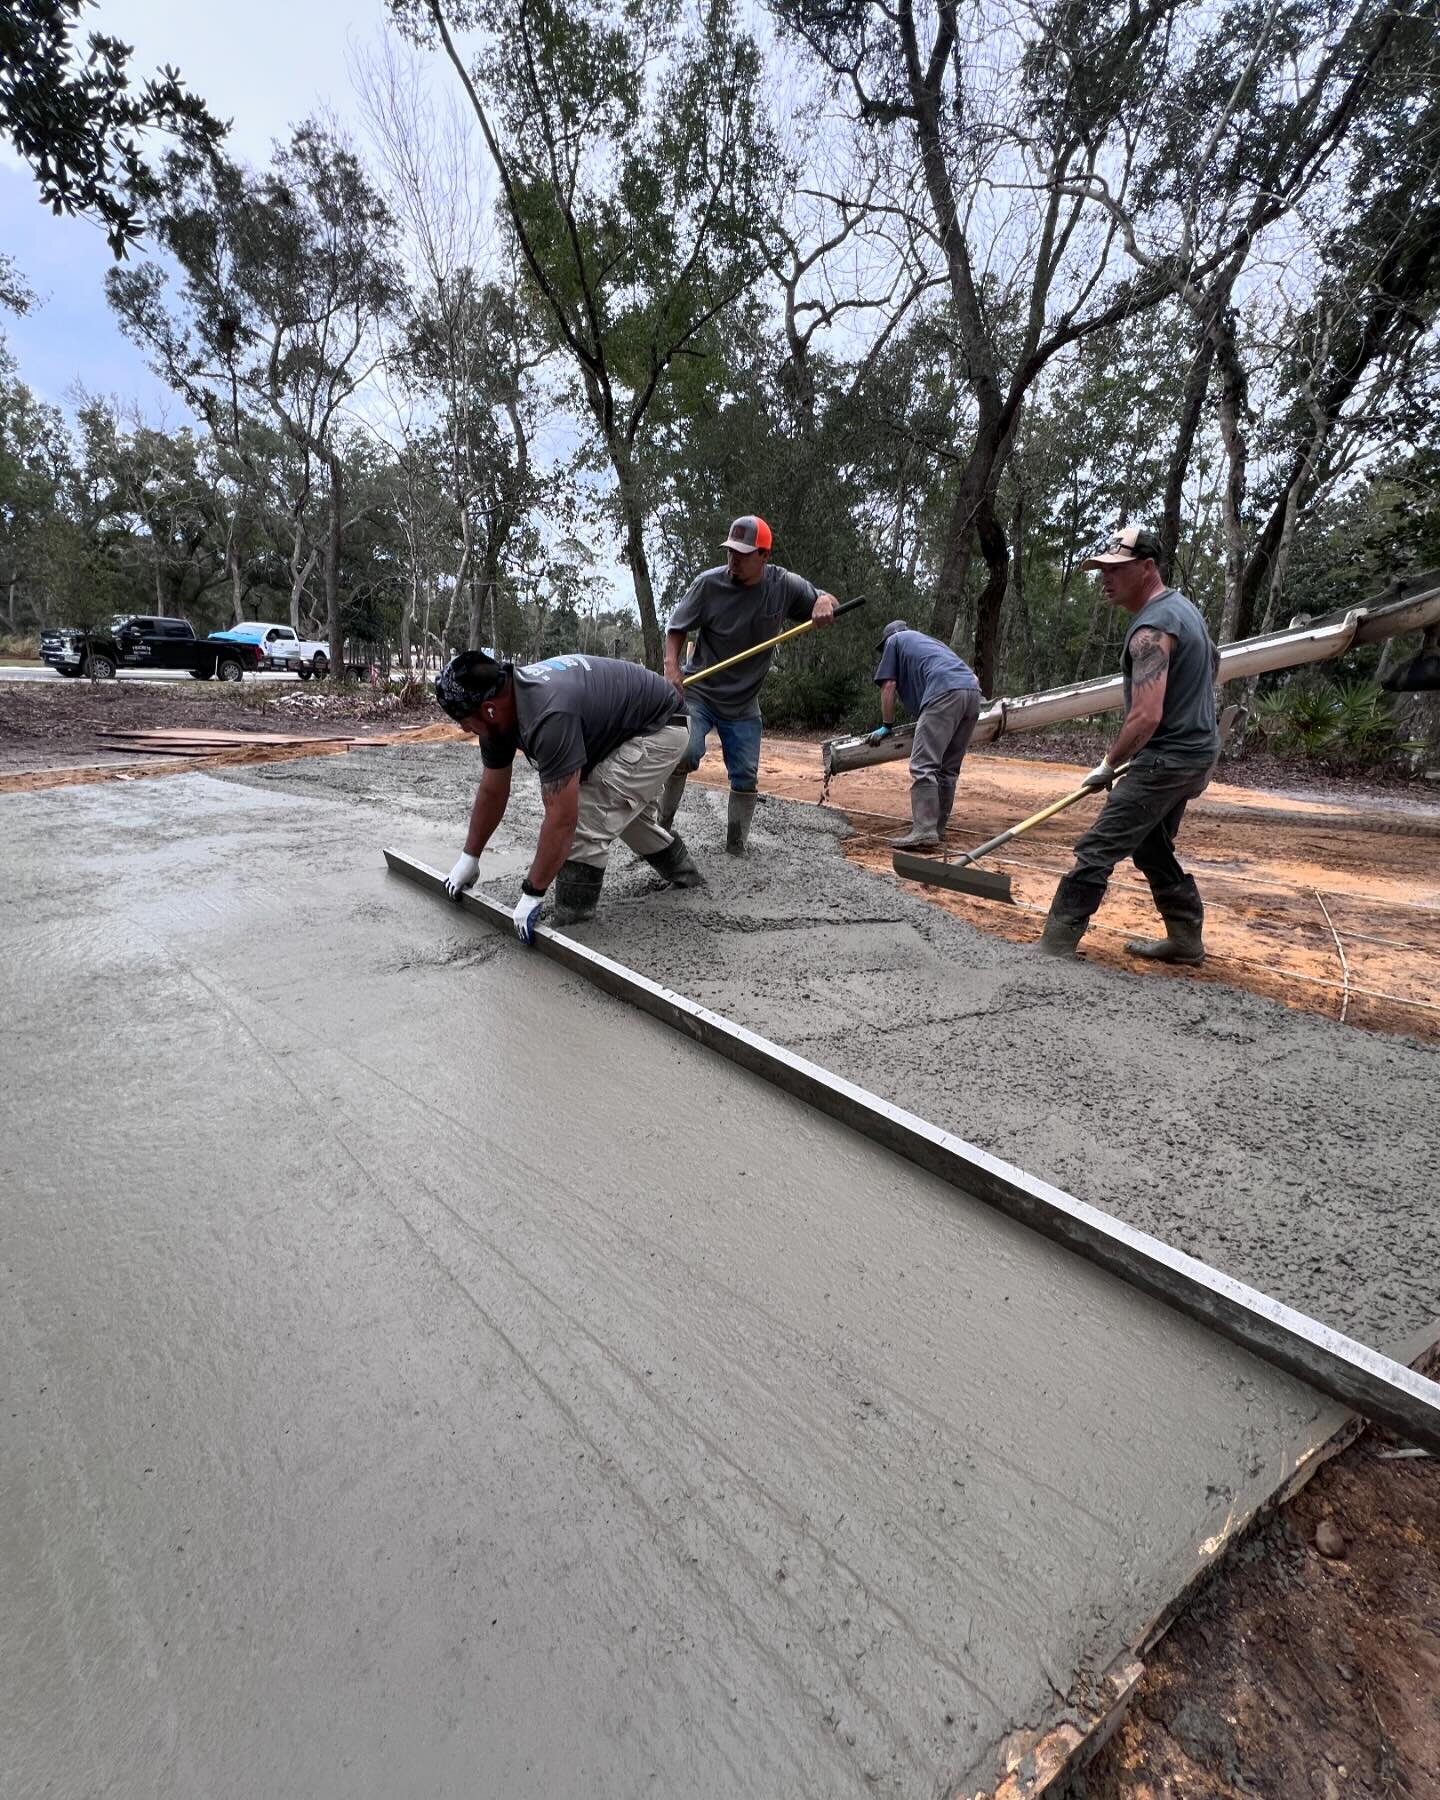 Our Orange Beach project is going great. Final placement is tomorrow. Enjoy your weekend everyone! #foxcrete #orangebeach #driveway